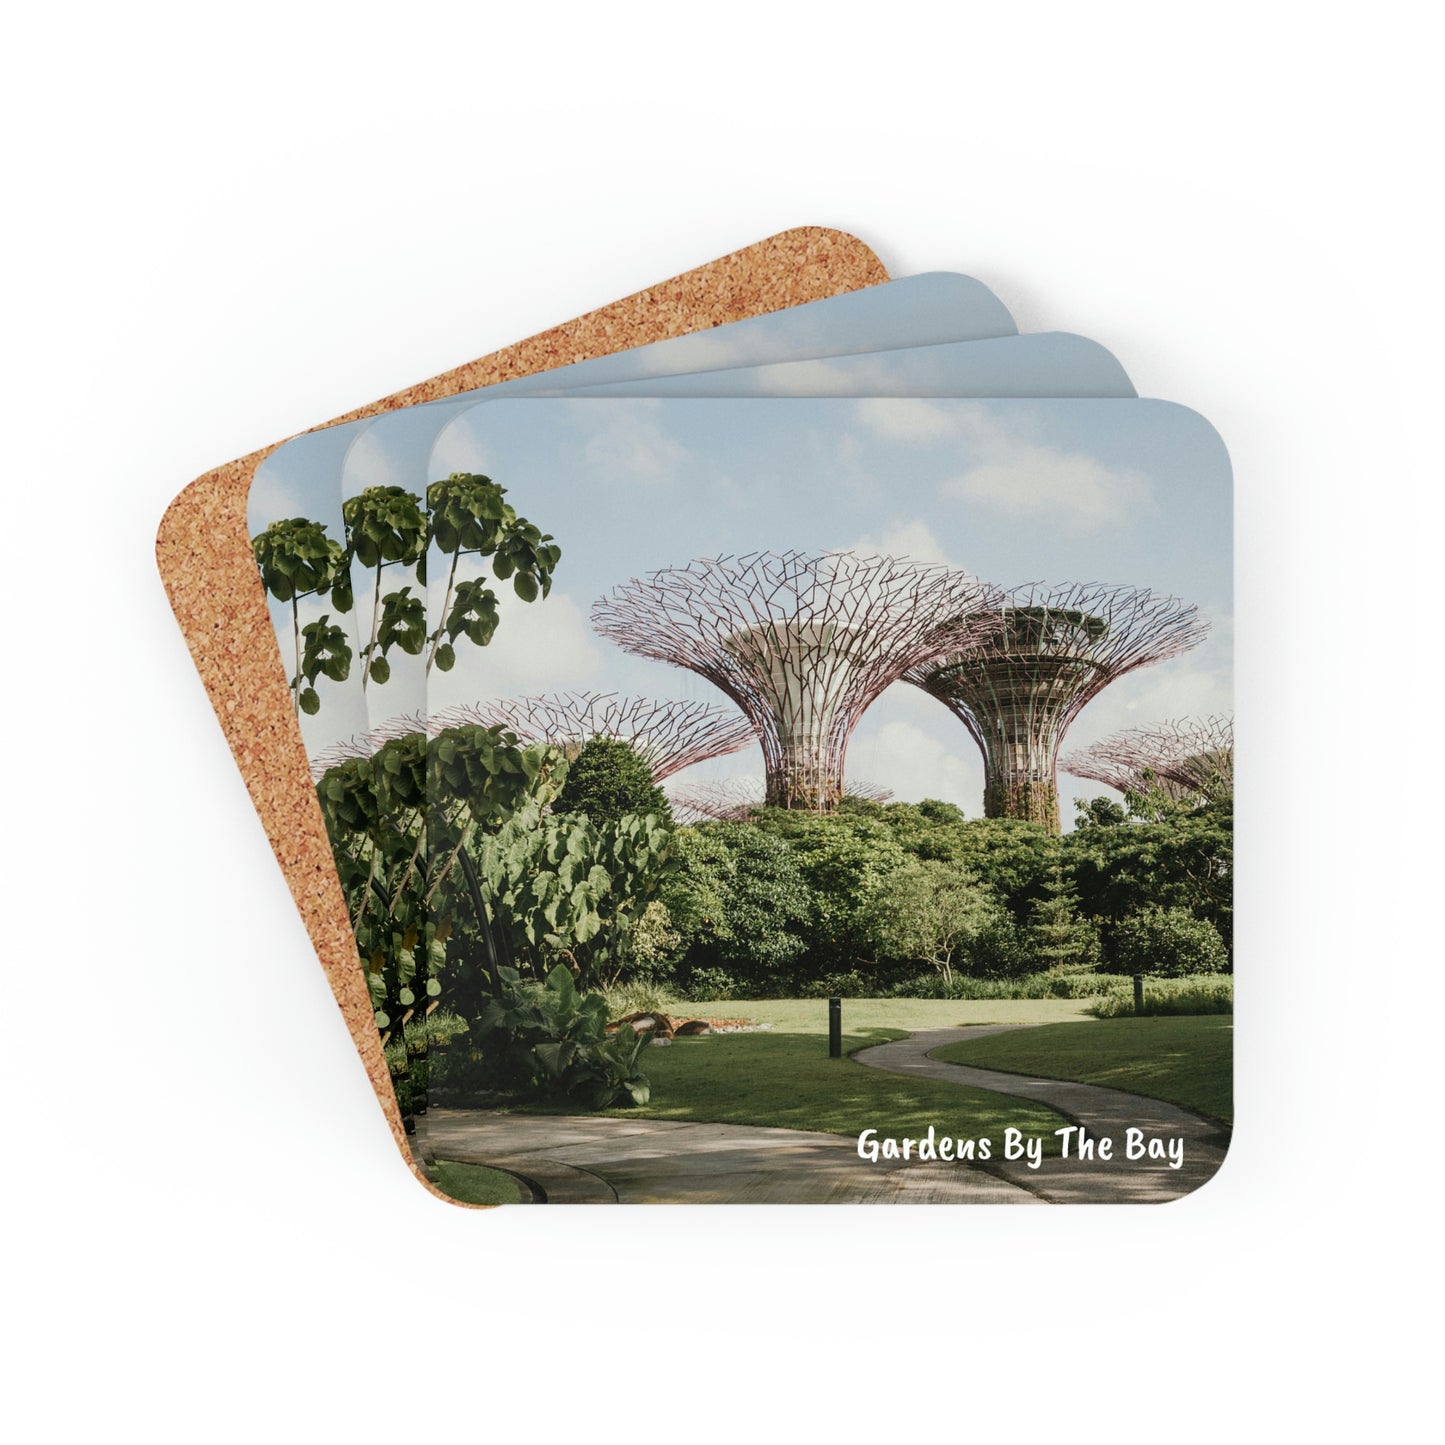 Corkwood Coaster Set (4) - SG Series (Gardens By The Bay)